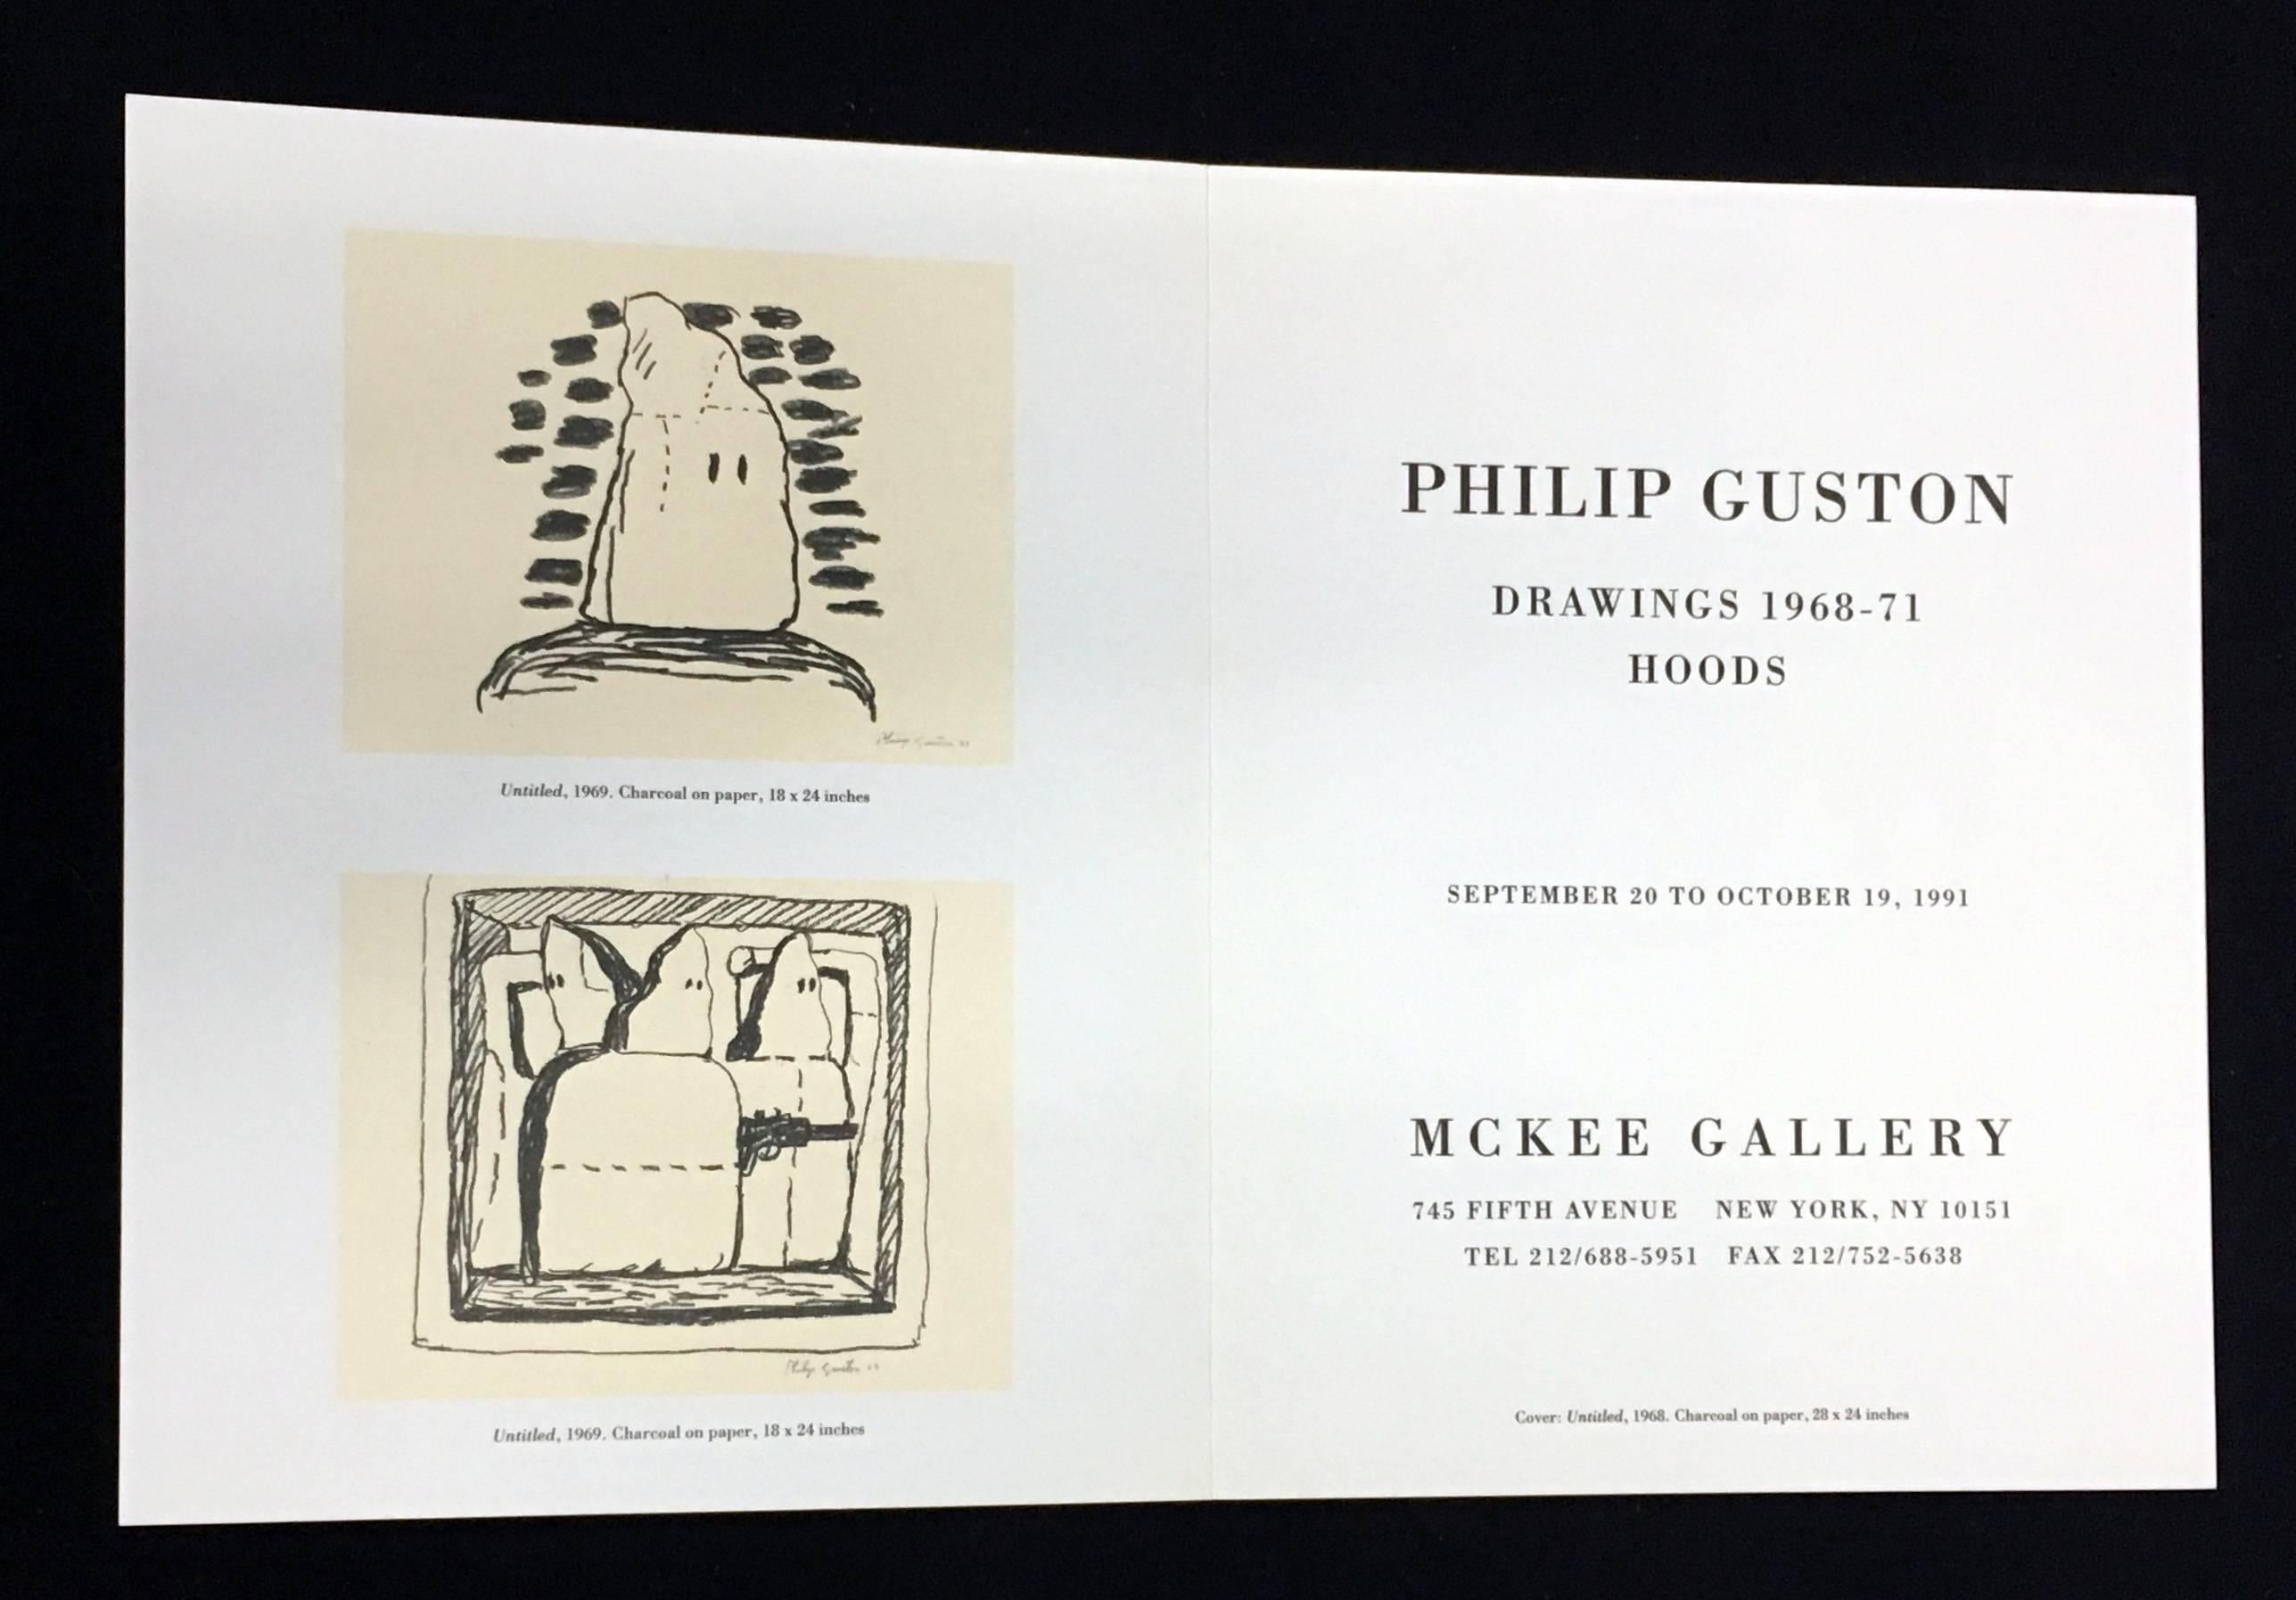 A set of four vintage Philip Guston announcement cards for 1982, 1983 and 1985 shows at Mckee Gallery, New York. 

Offset print on cardstock
dimensions: 7 x 9 (2), 8.5 x 6.5 and 6 x 9 inches
Very good condition for all 
Quite decorative and